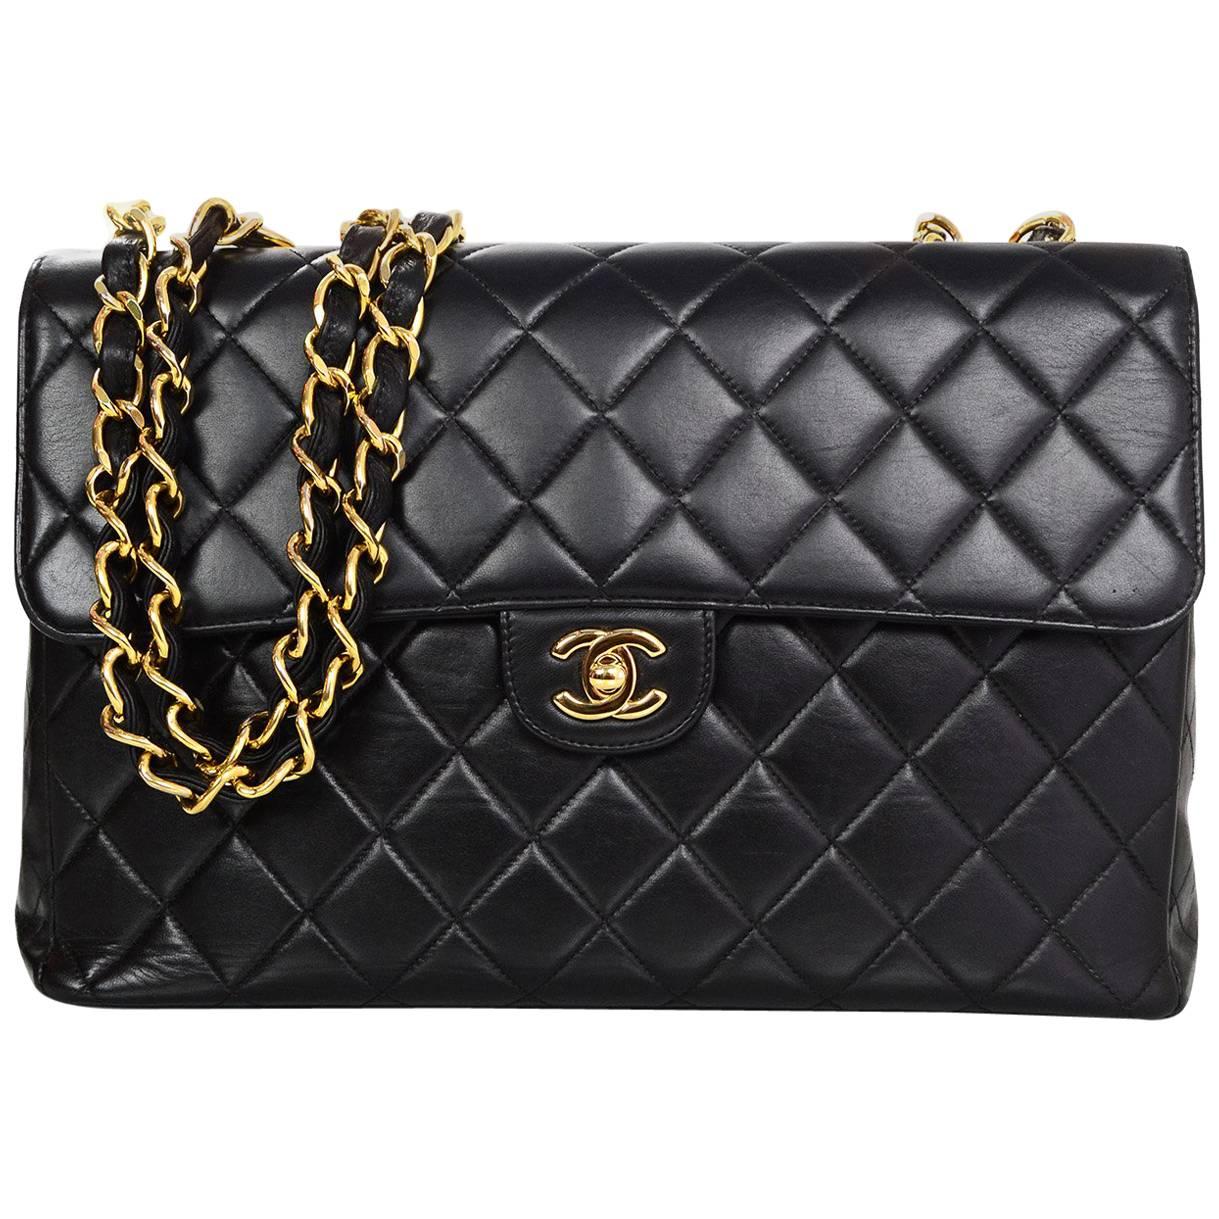 Chanel Black Lambskin Leather Quilted Classic Jumbo Single Flap Bag